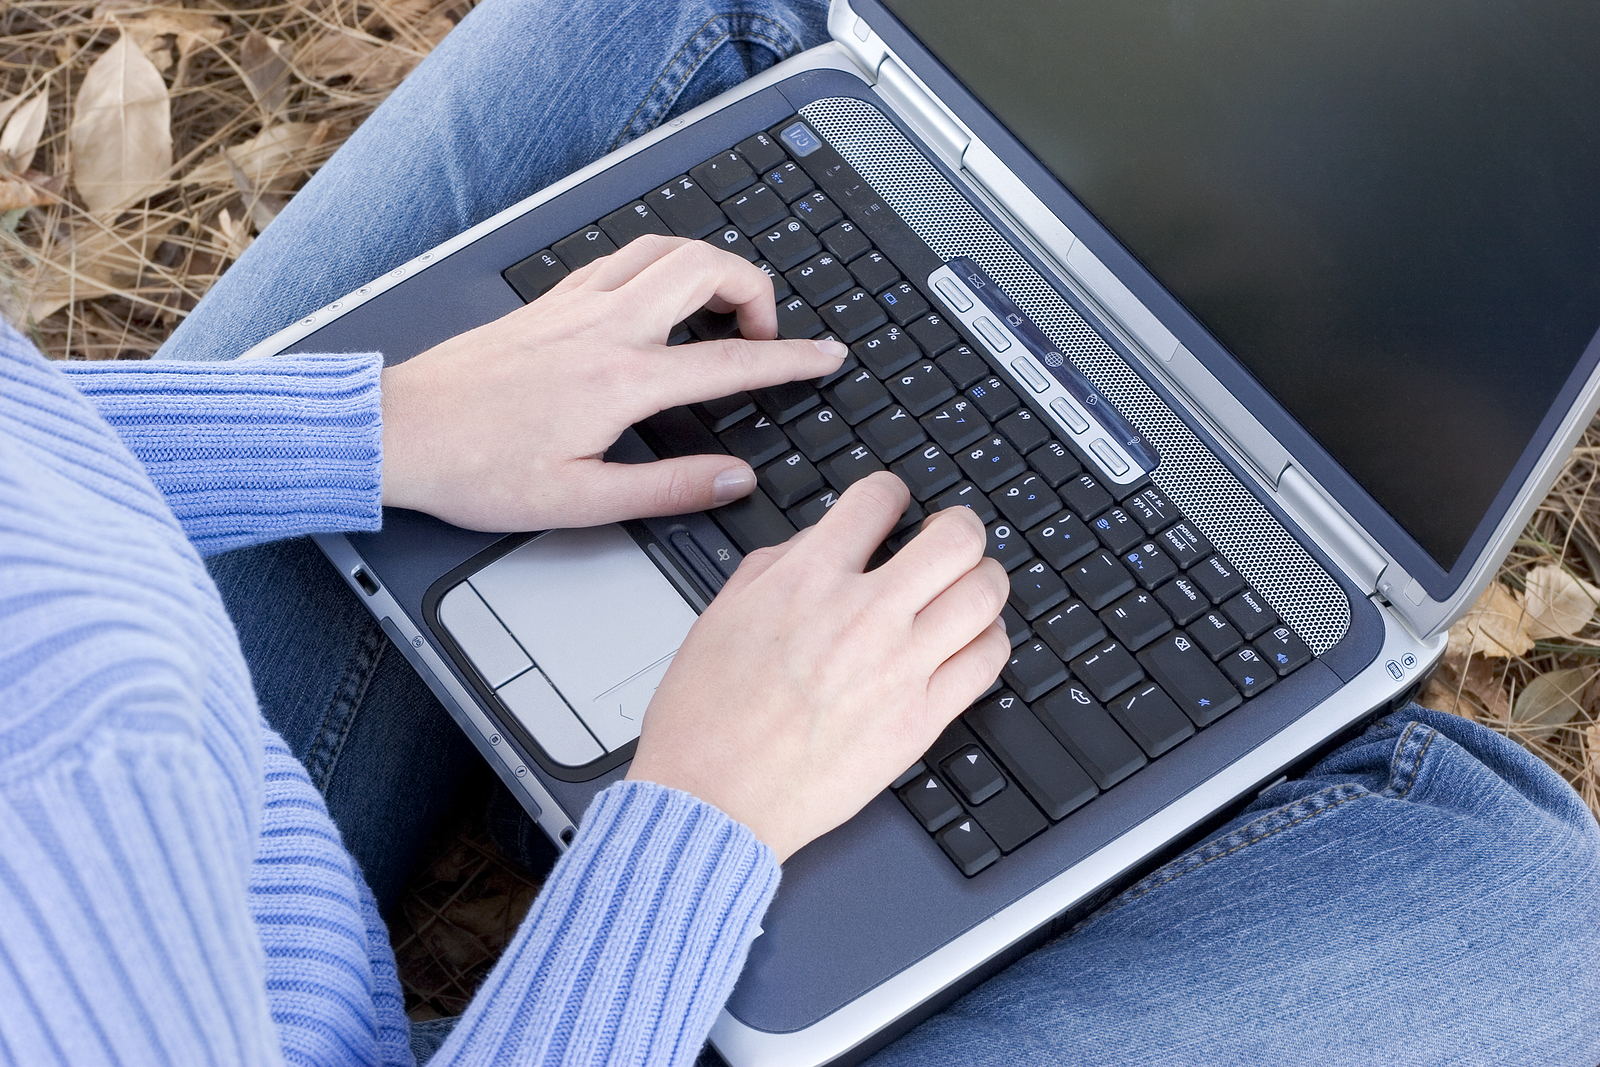 Photo of a therapist working on their website SEO on a laptop computer.